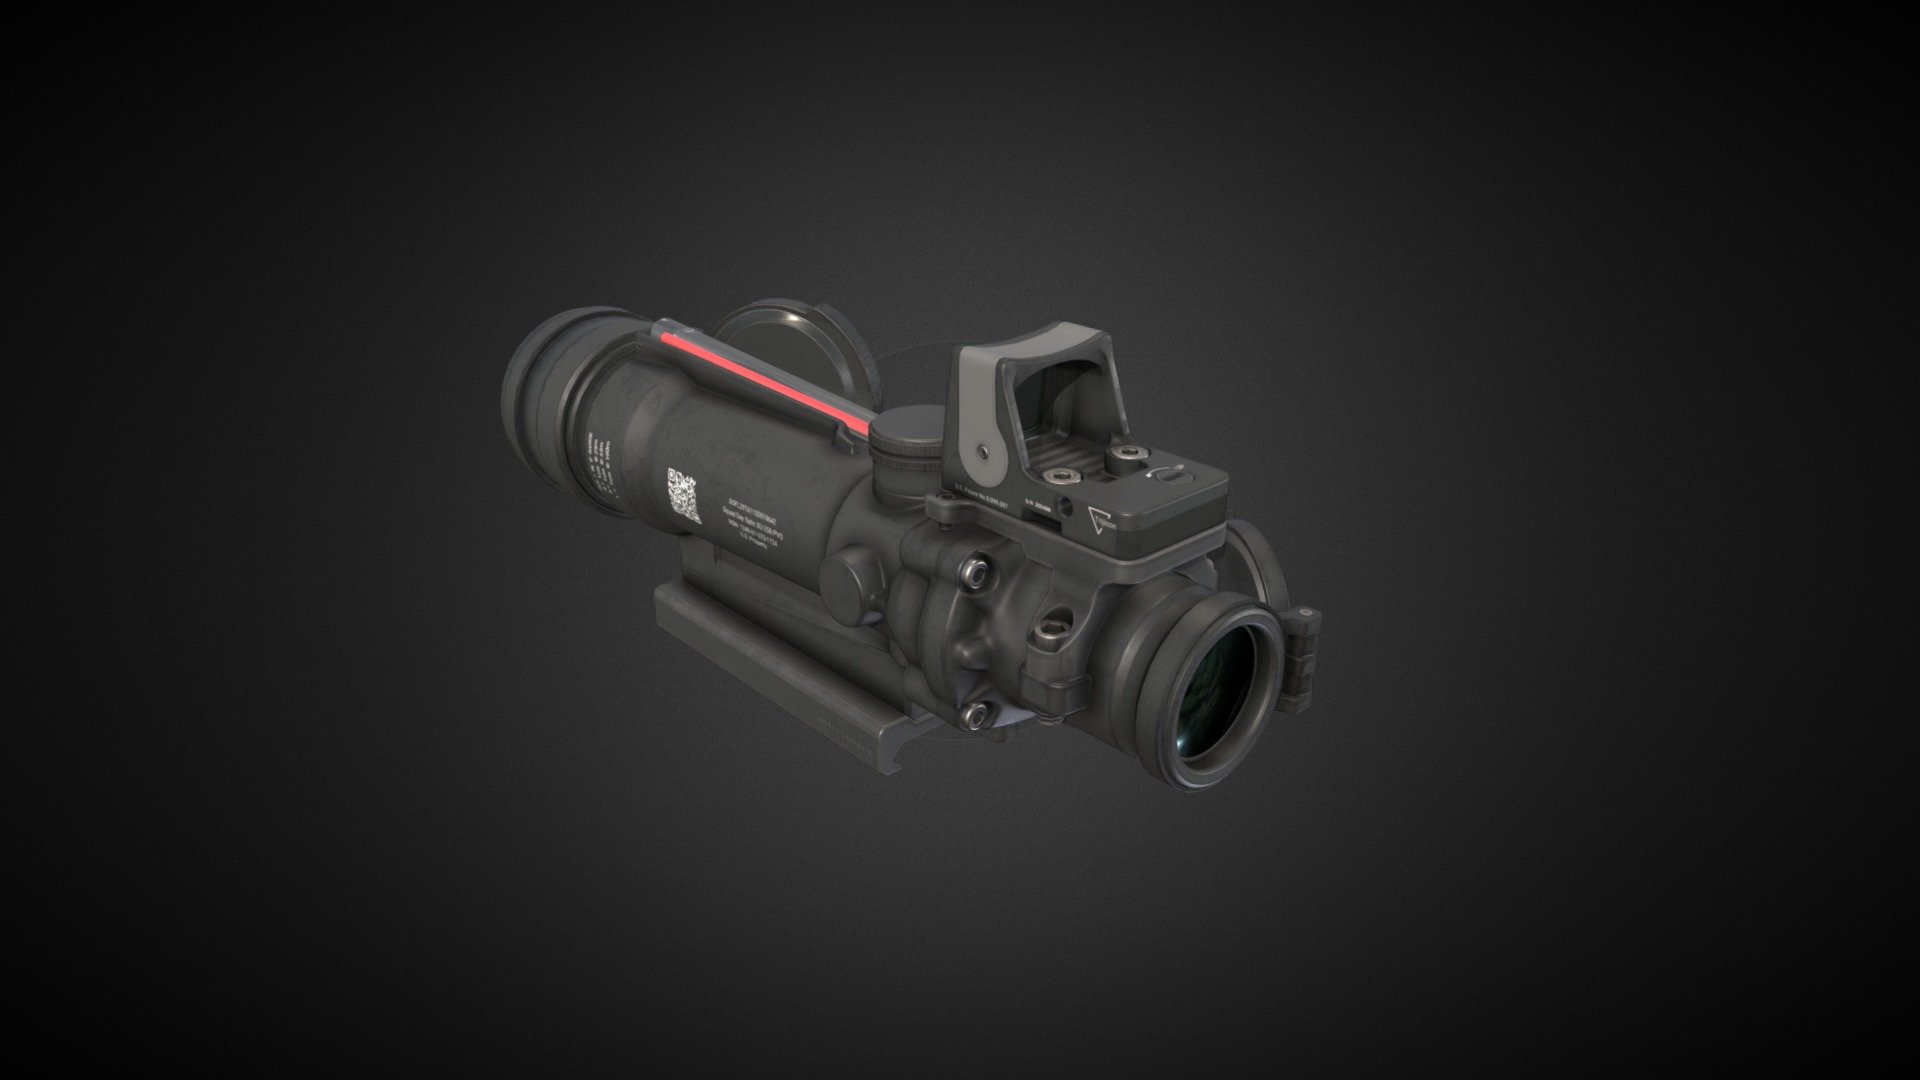 Variant of classic ACOG styled optic, mostly used on light machine guns like M249. 

Comes with Small RMR RedDot for quick target acquisition at close quarter distances.  

Model have 2 Main PBR Materials in 4K plus separate 2K for lenses and red dot. 

Verts:10K

Tris: 19.7K

(tad big but it have that reddot, mount for it and covers).  

Made in Blender 3d model